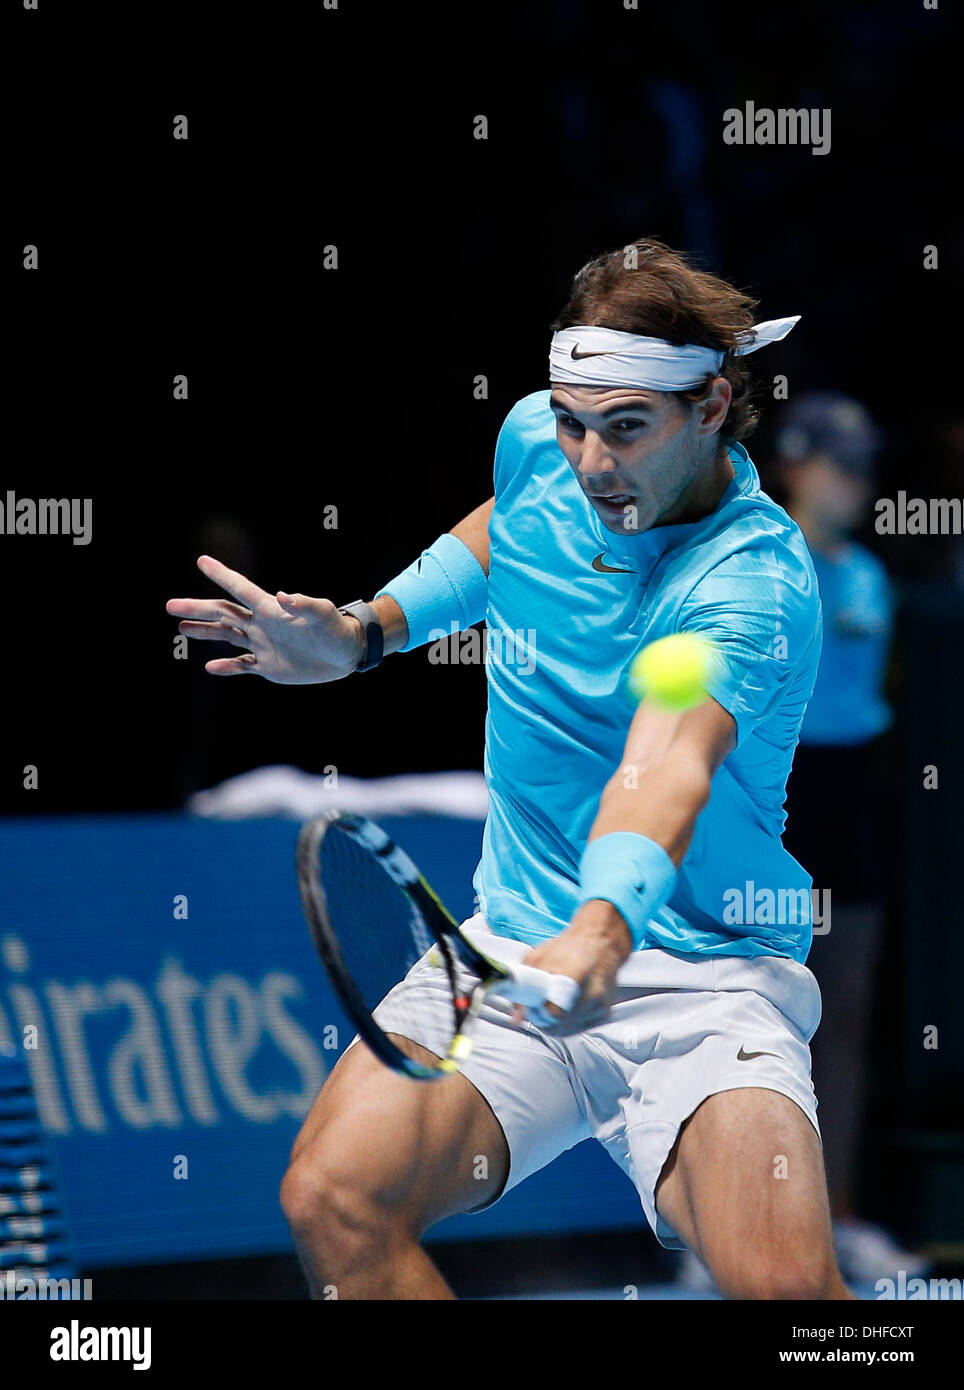 London, UK. 08th Nov, 2013. Rafael Nadal (ESP) defeats Tomas Berdych (CZE) by a score 6-4, 1-6, 6-3 during day five of the Barclays ATP World Tour Finals from the O2 Arena. © Action Plus Sports/Alamy Live News Stock Photo